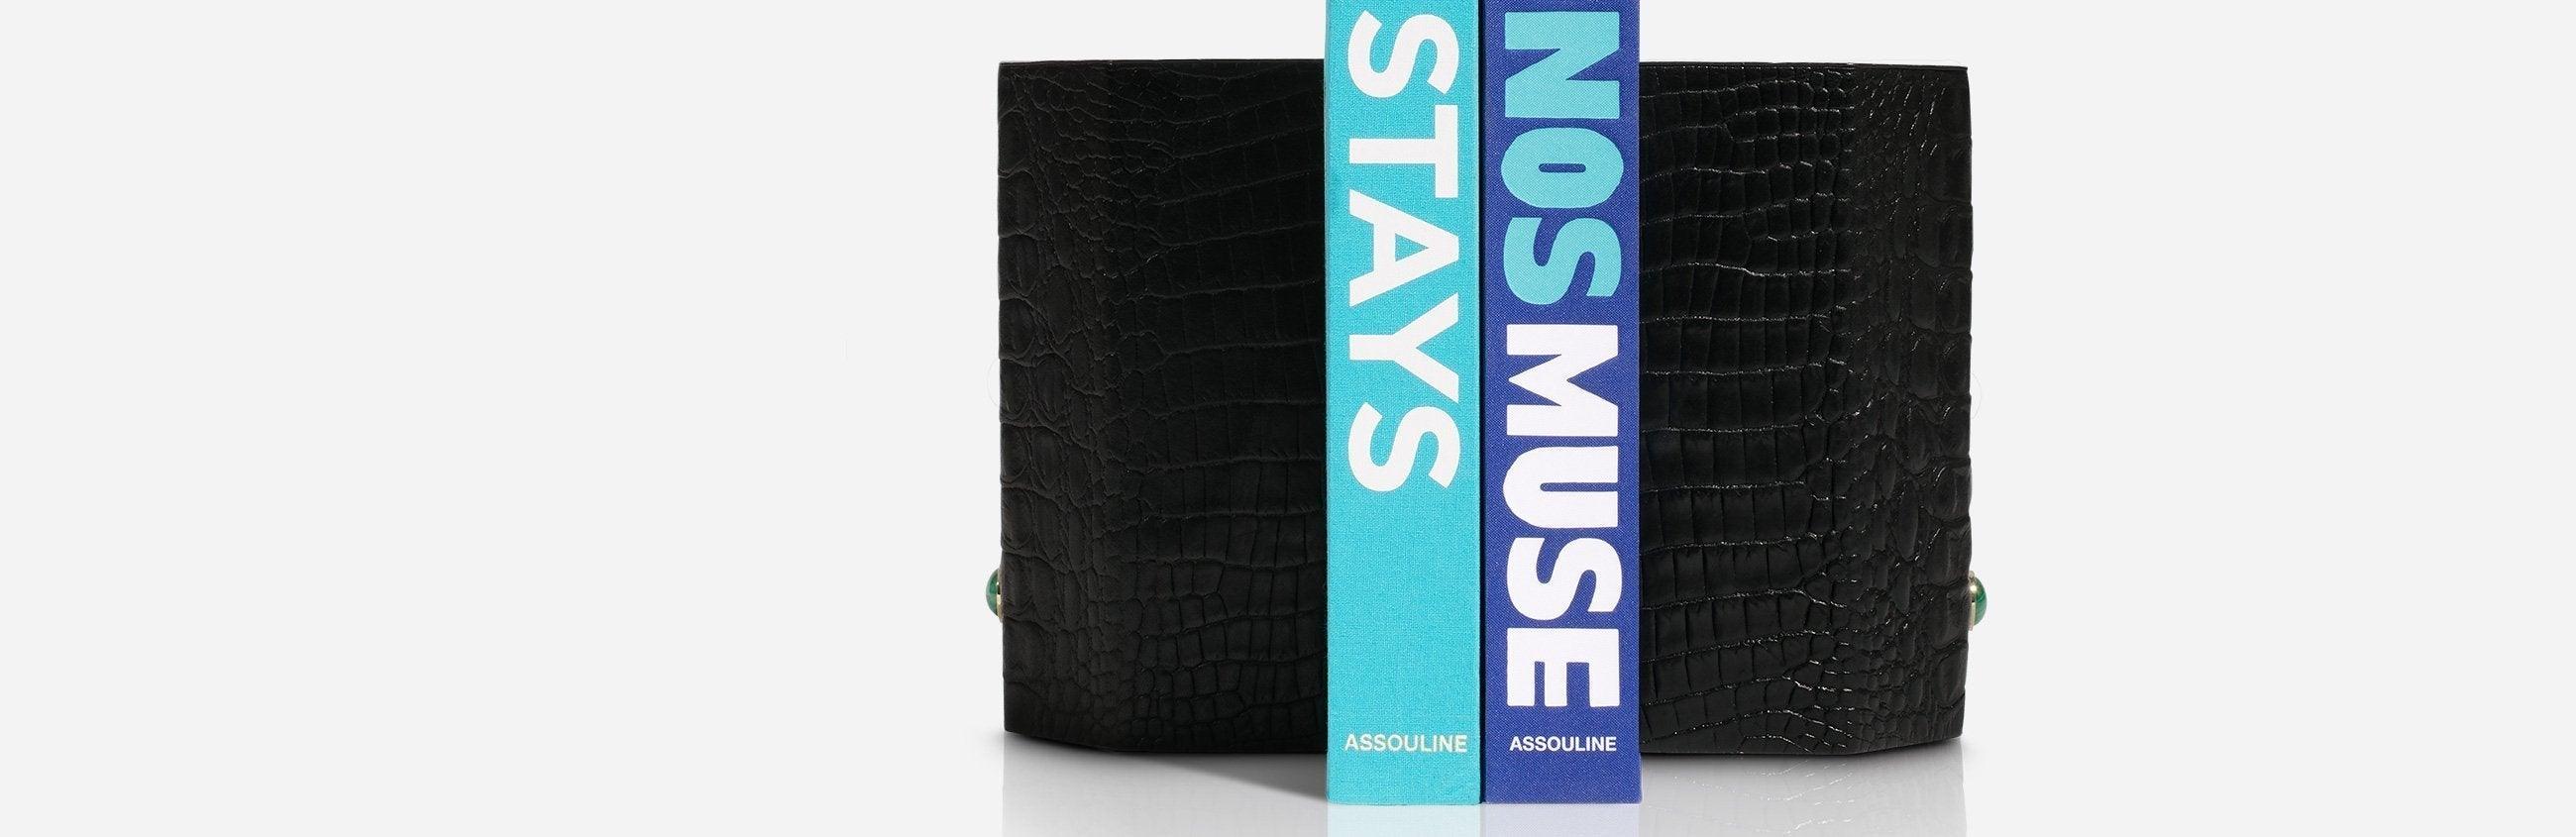 Assouline Collection Bookends